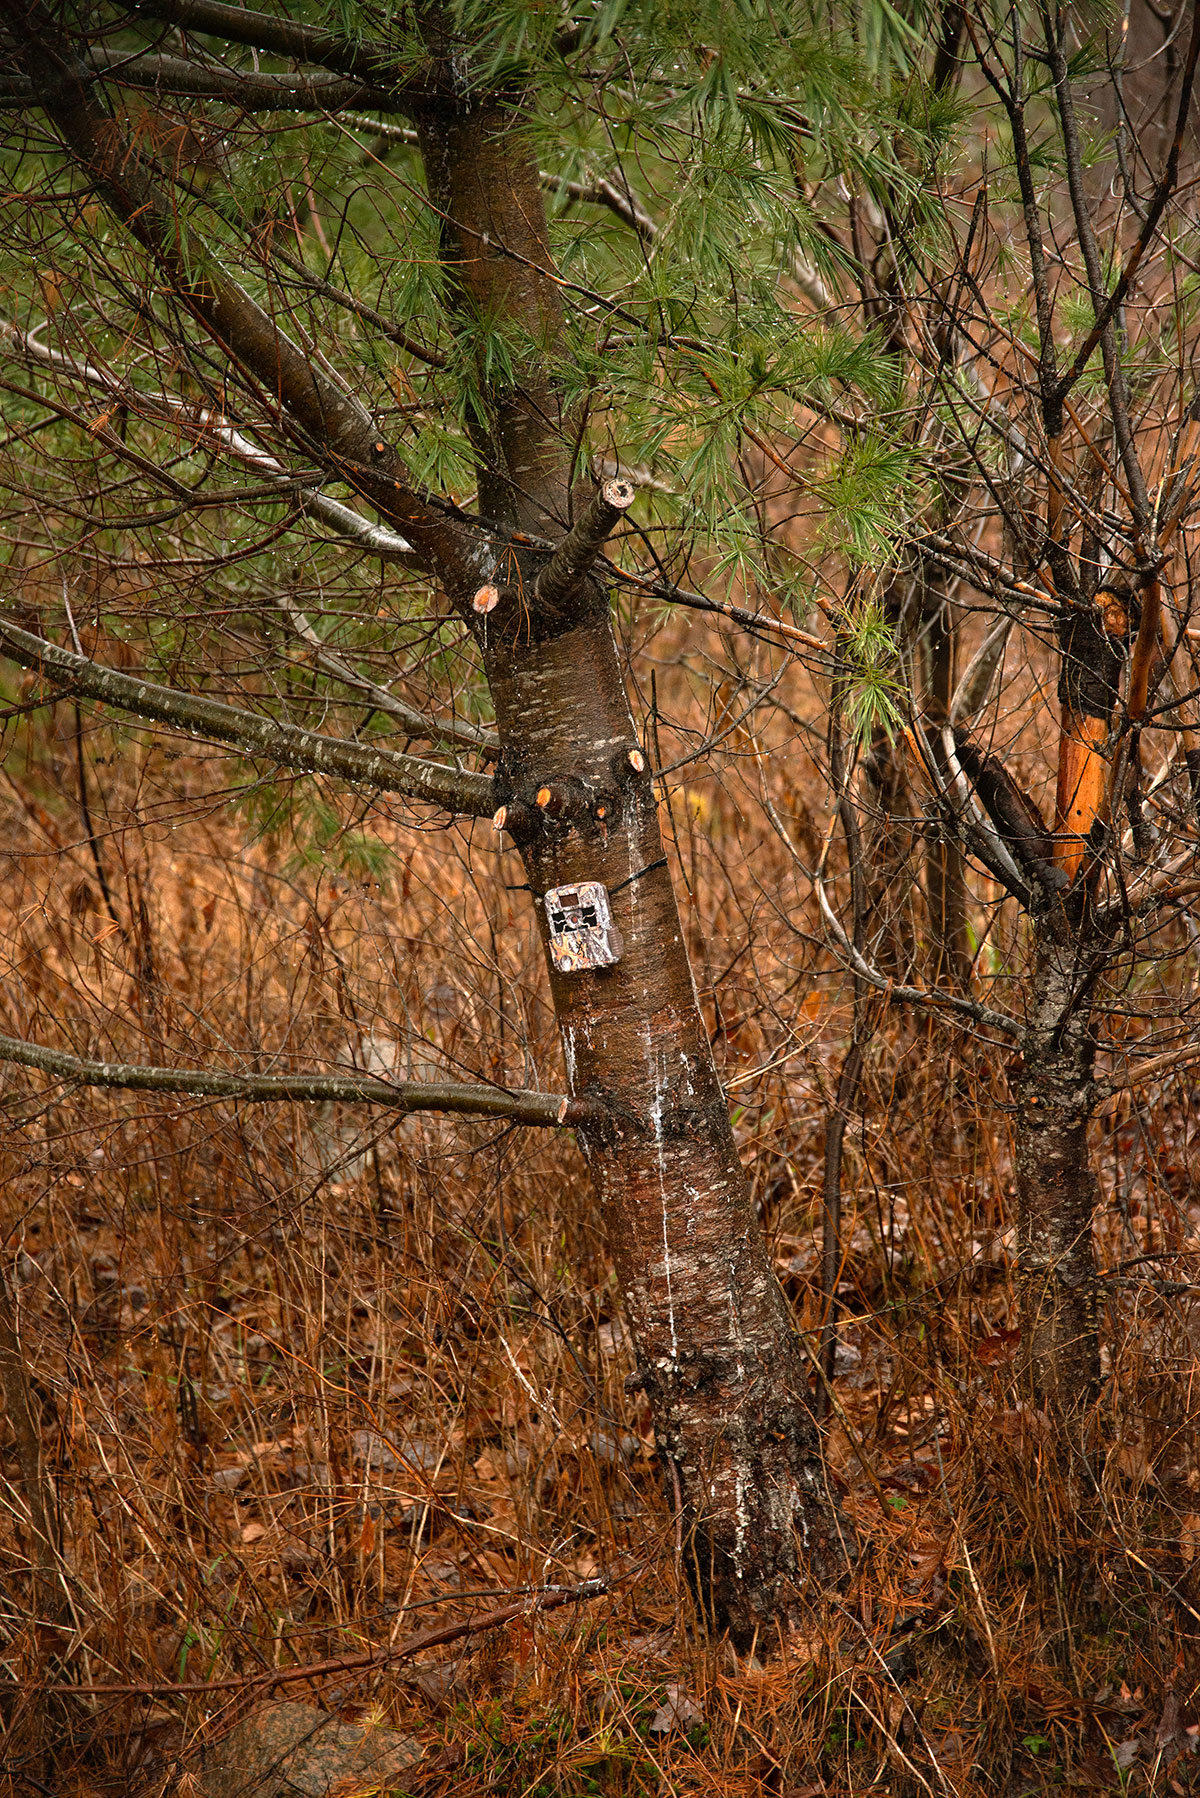 Photo of a weathered trail camera strapped to the trunk of a tree in a heavily wooded area